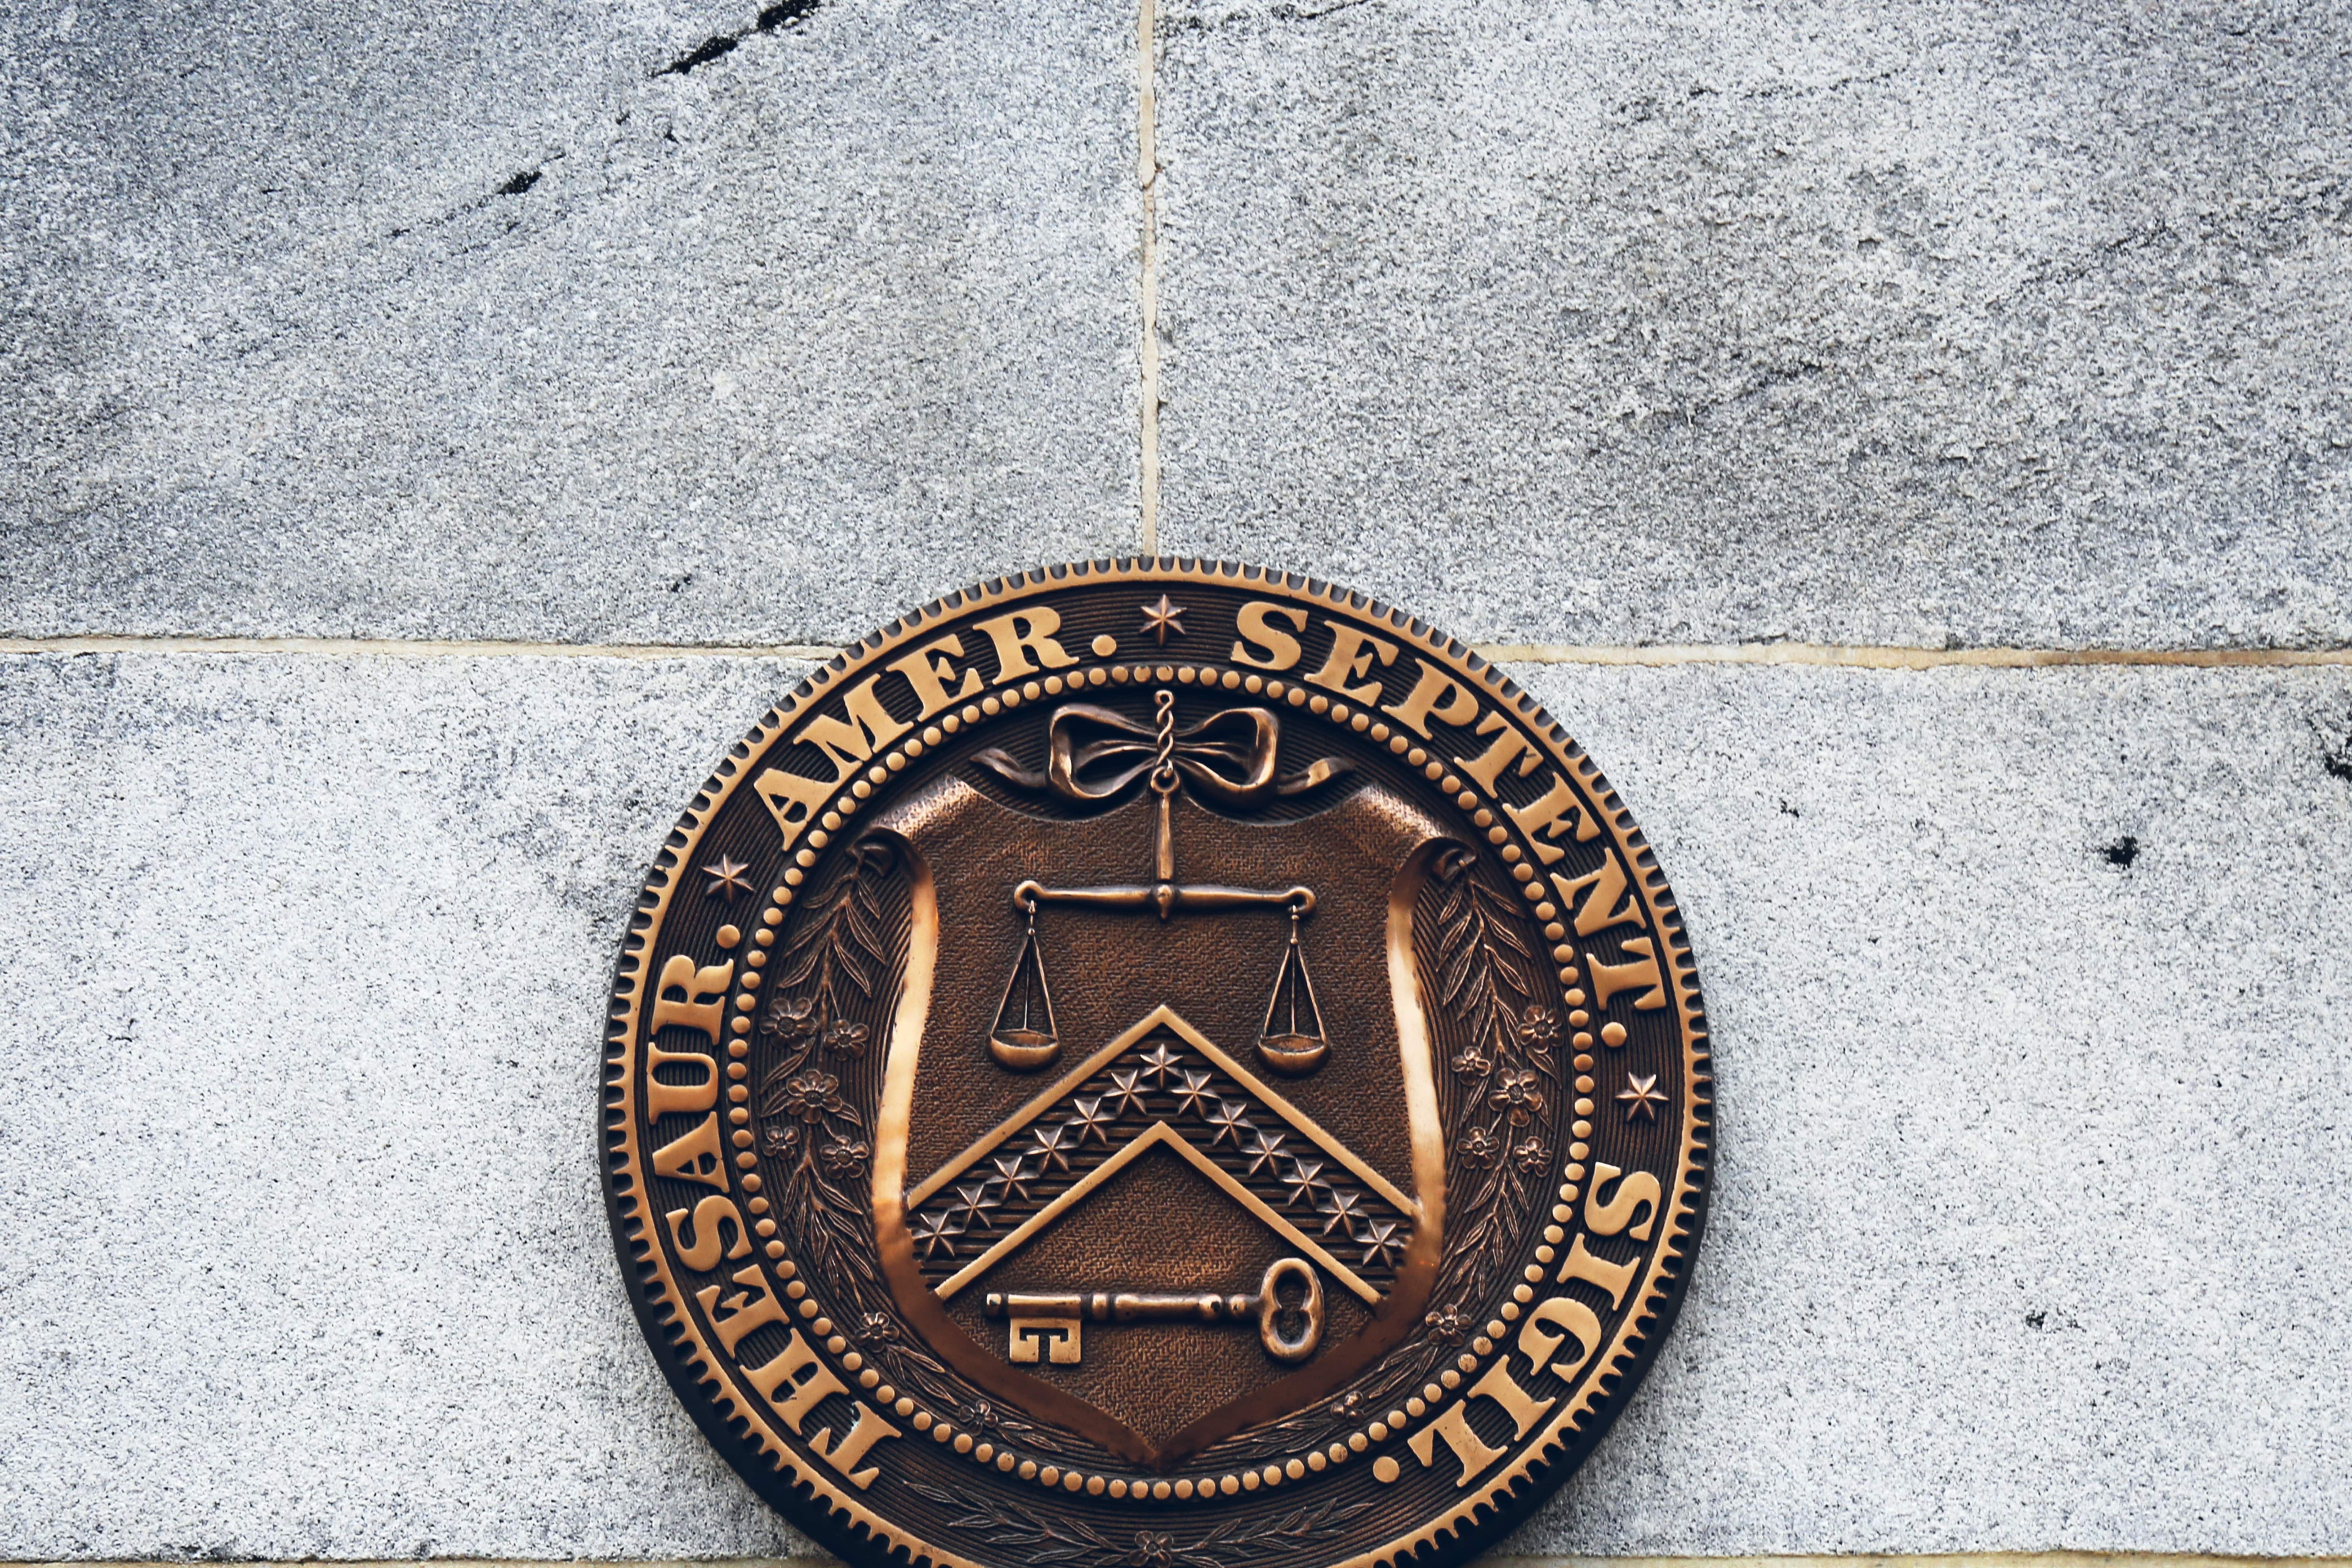 Picture of the seal of the U.S. treasury department on a stone building